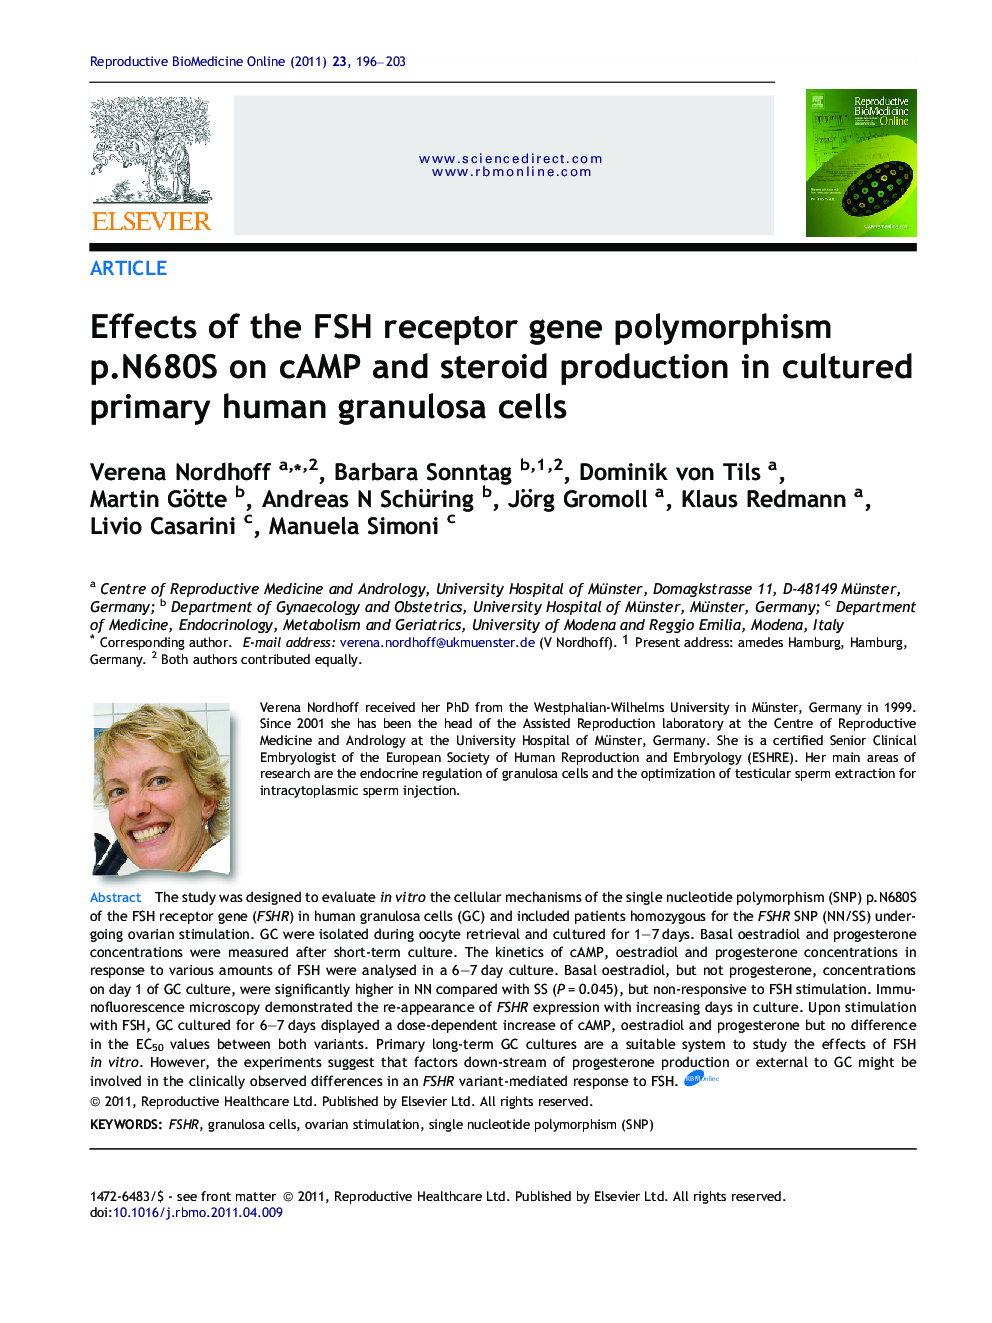 Effects of the FSH receptor gene polymorphism p.N680S on cAMP and steroid production in cultured primary human granulosa cells